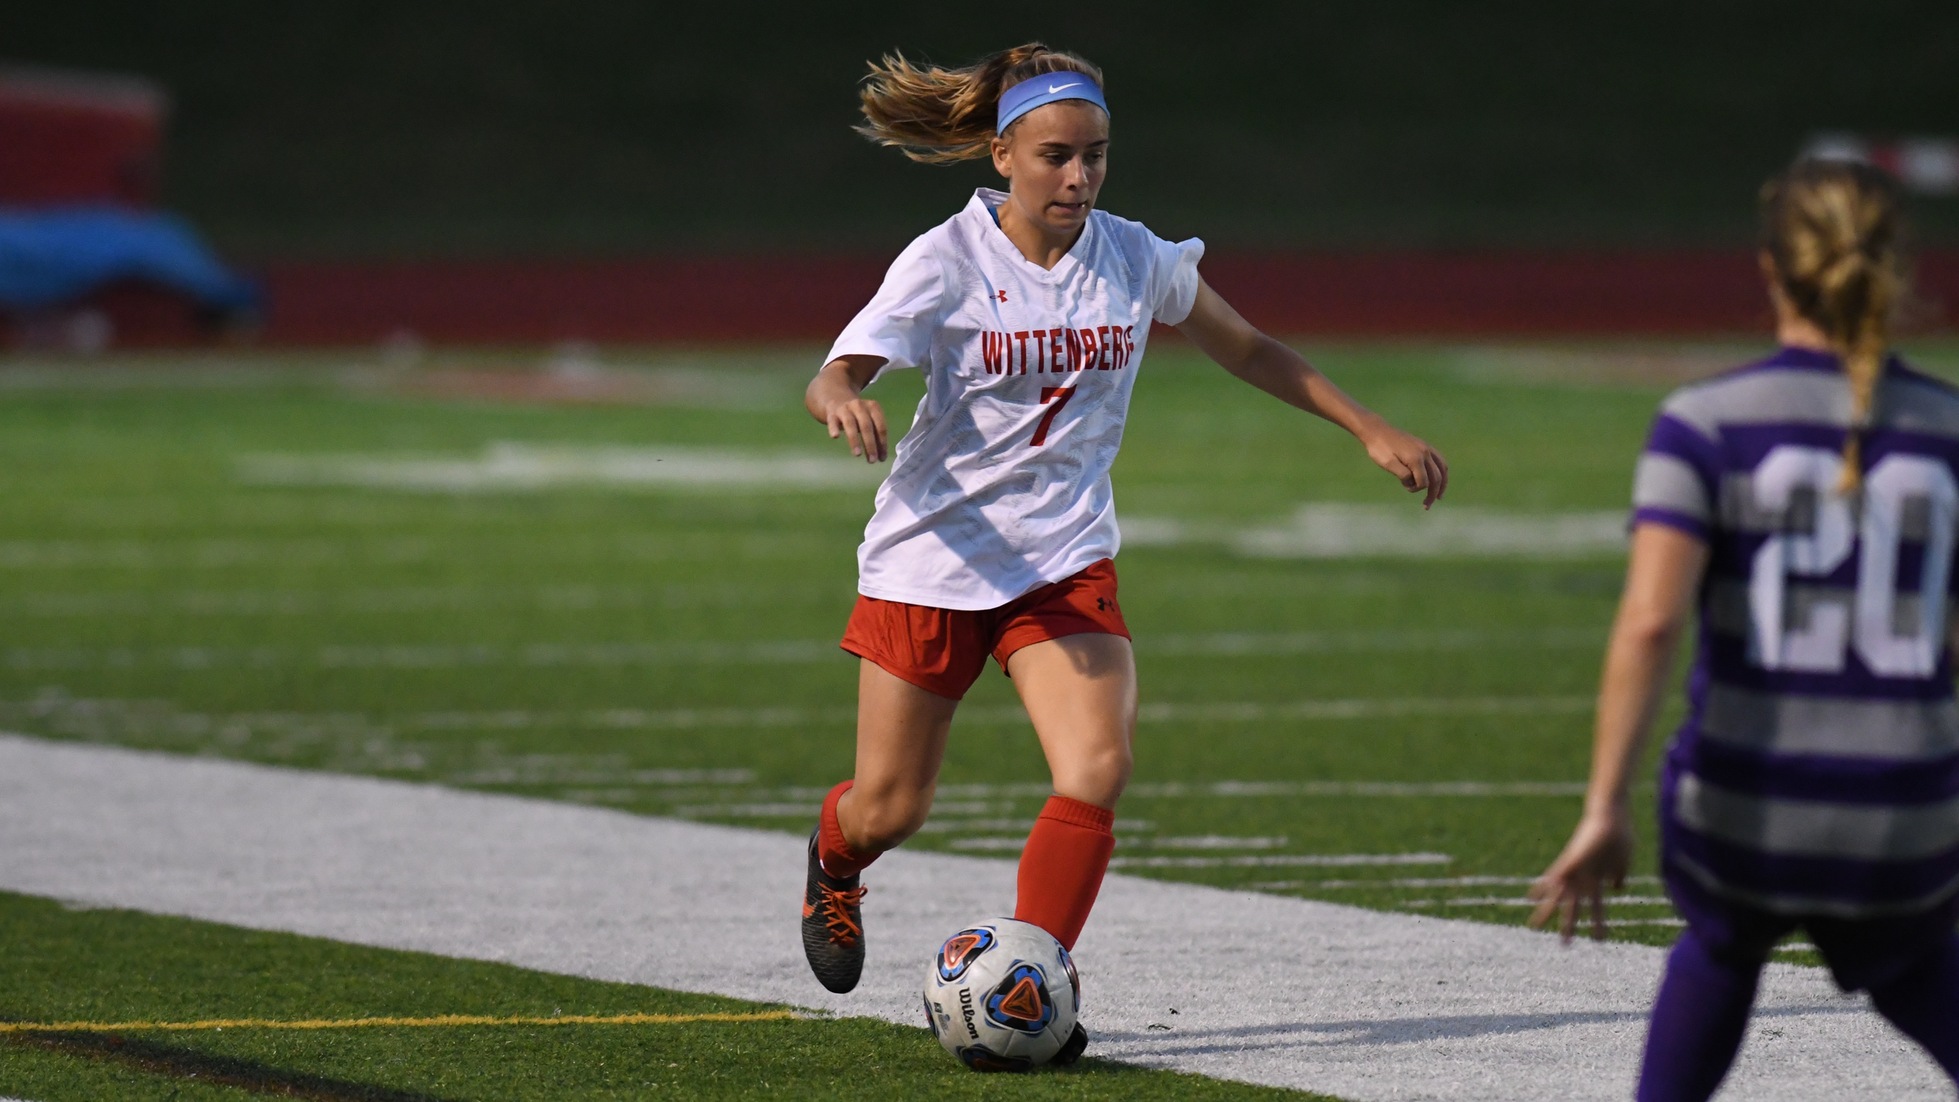 Wittenberg and senior Shannon Brueck cruised to a 3-0 win over Wisconsin-Whitewater in Sunday's home opener